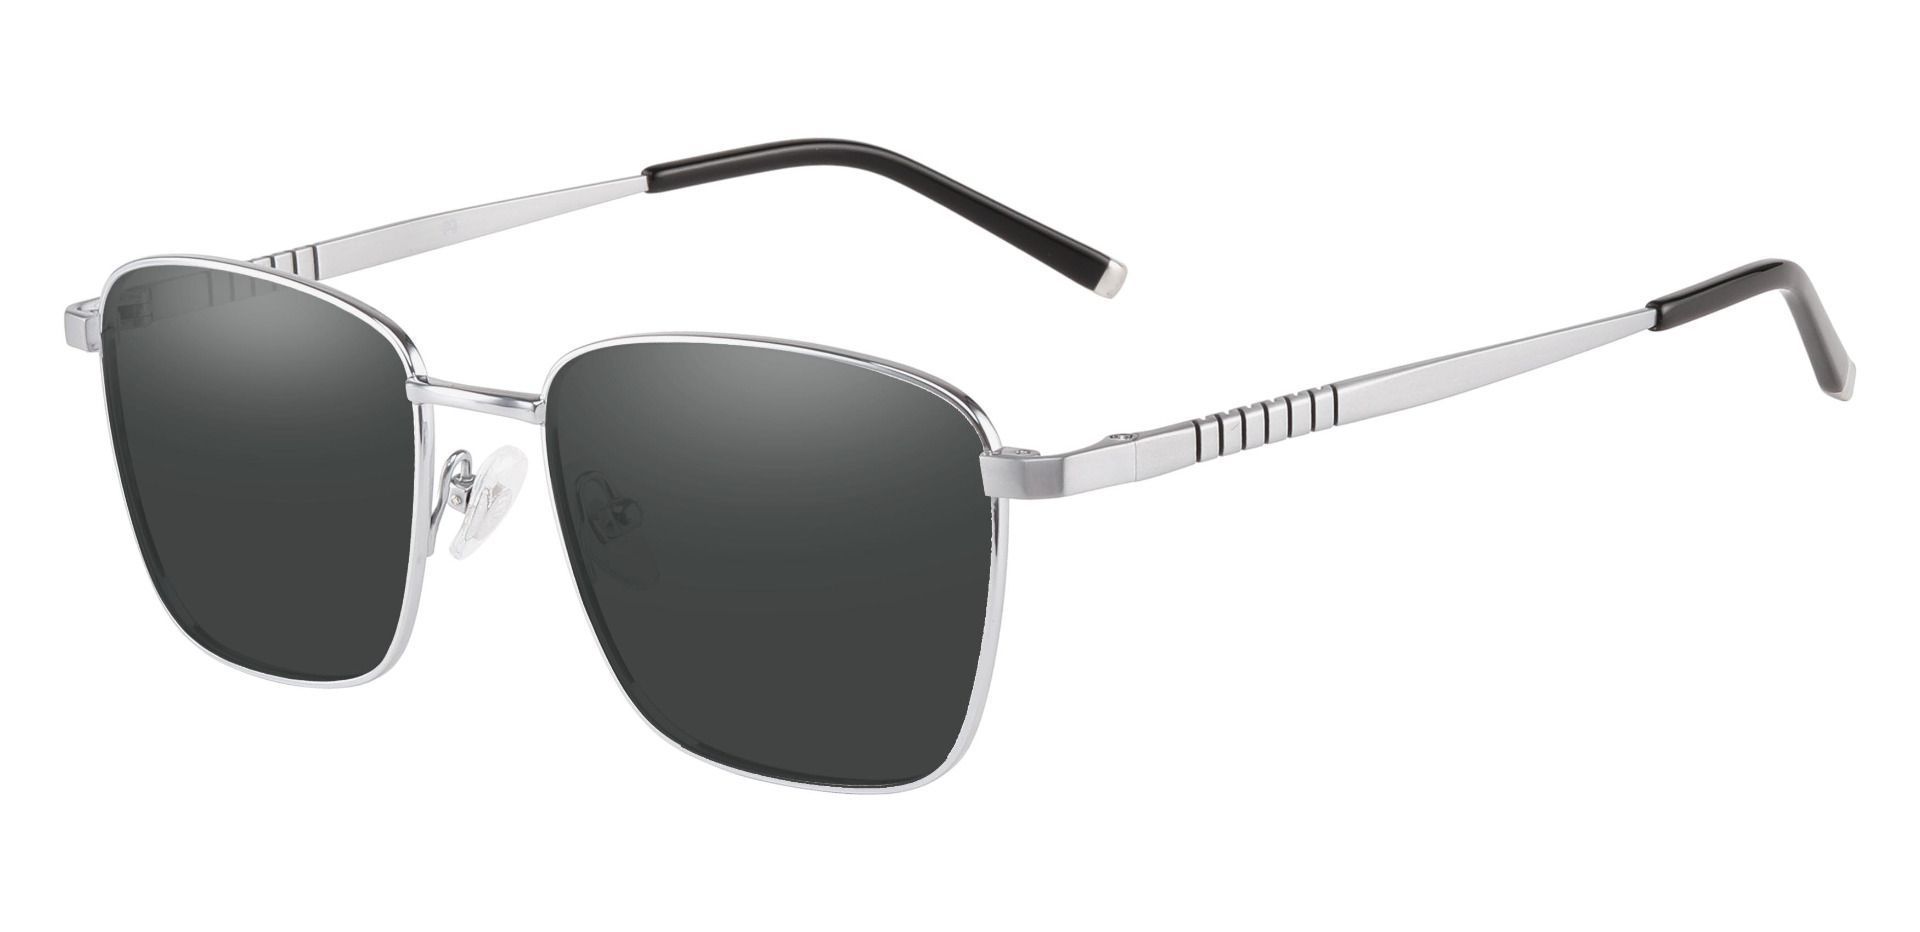 May Square Non-Rx Sunglasses - Silver Frame With Gray Lenses